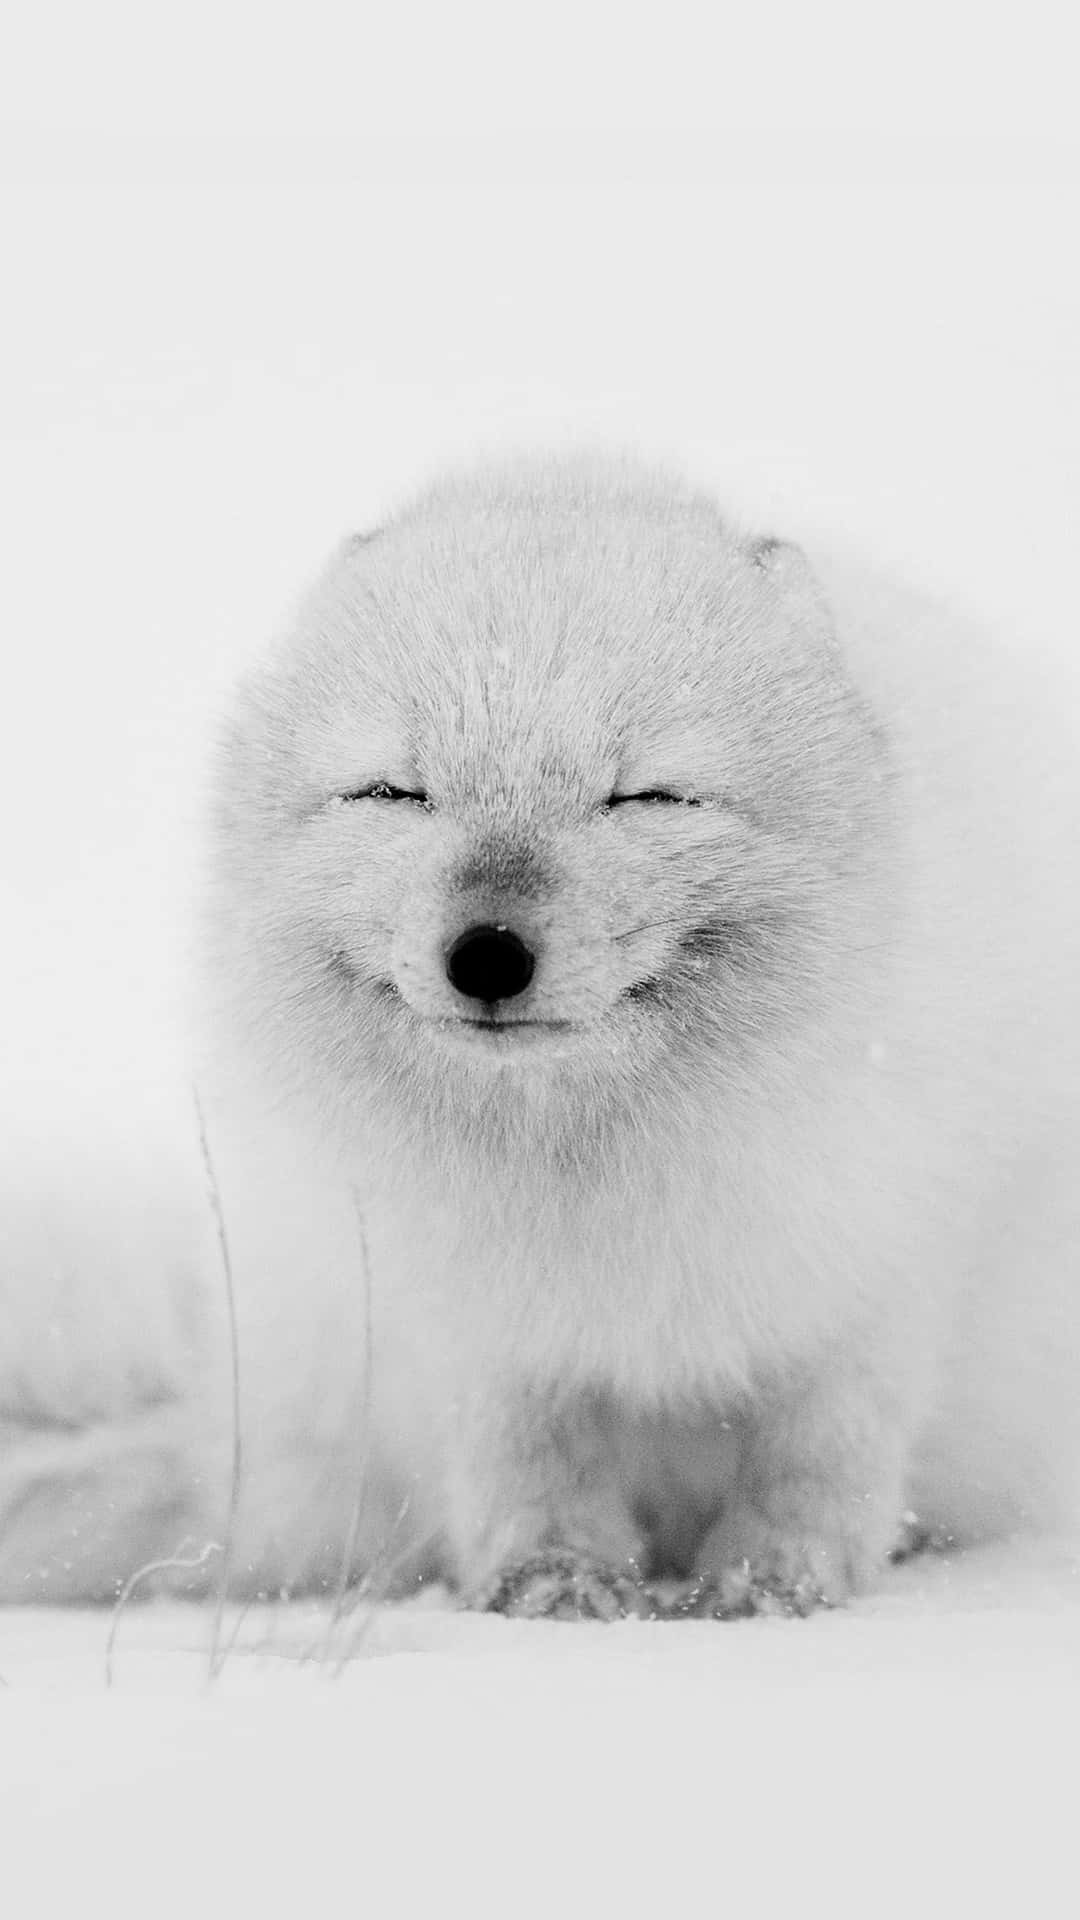 An Arctic Fox in its natural habitat in the winter months